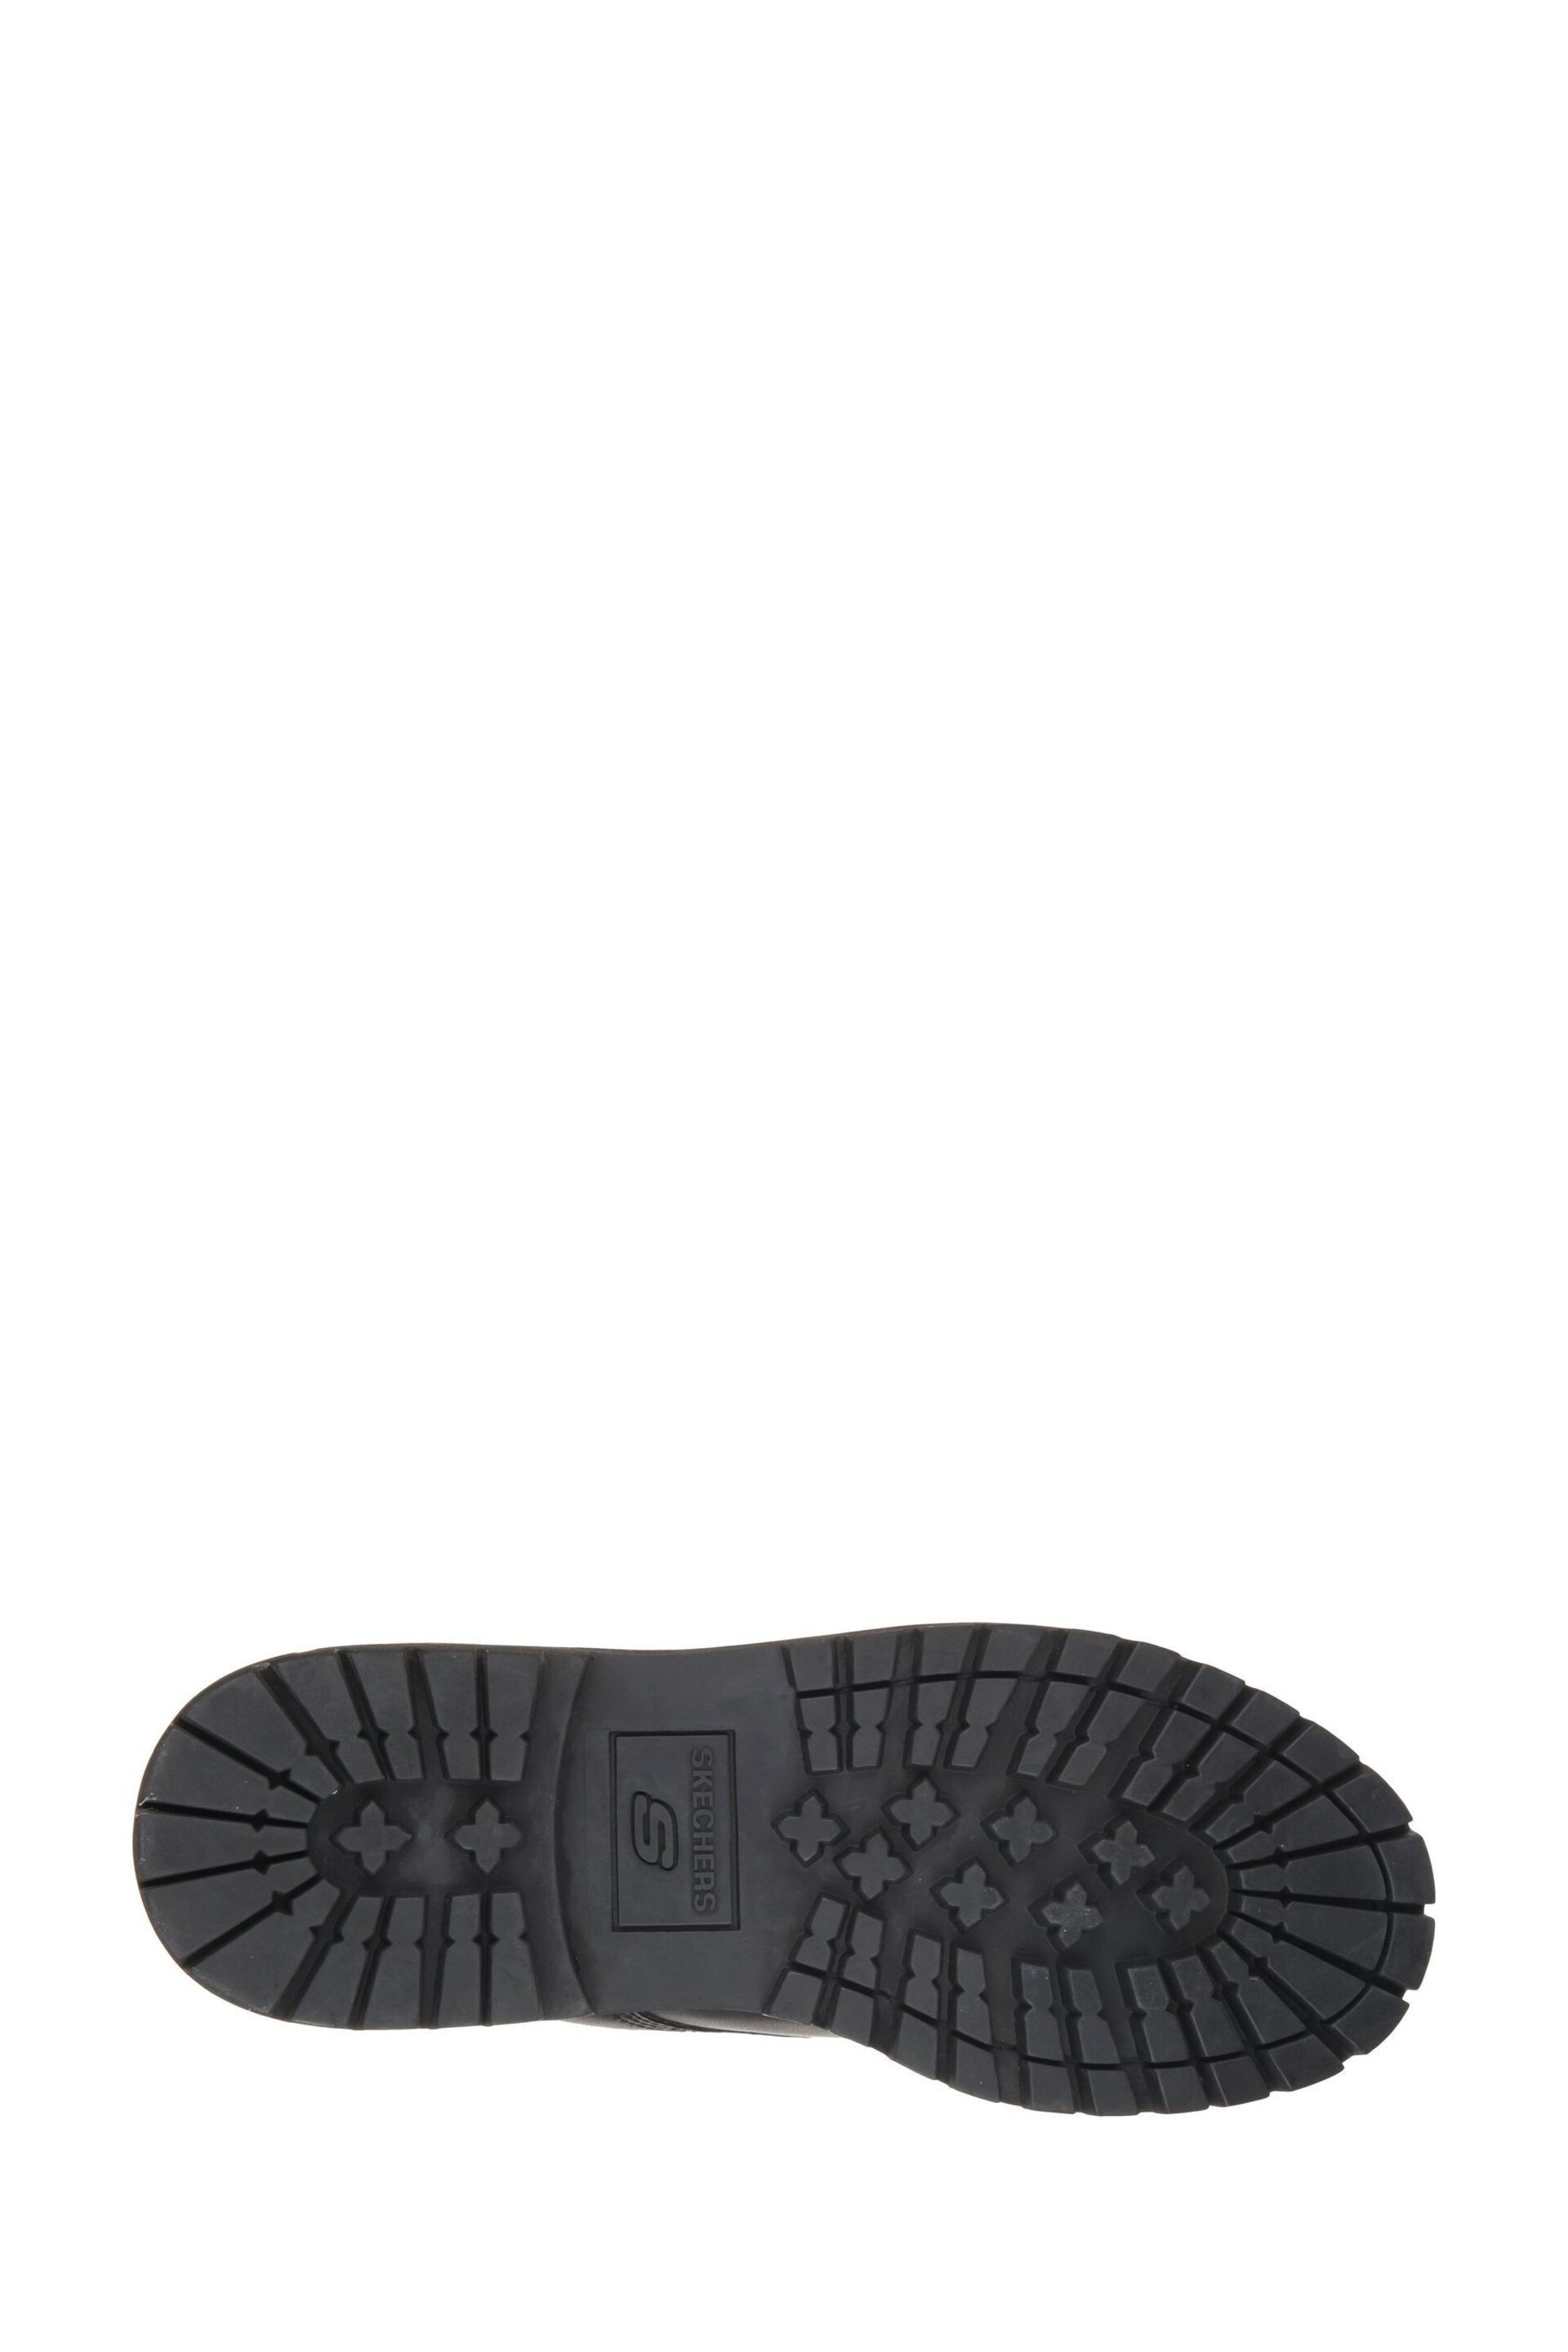 Skechers Black Mens Tom Cats Shoes - Image 5 of 5